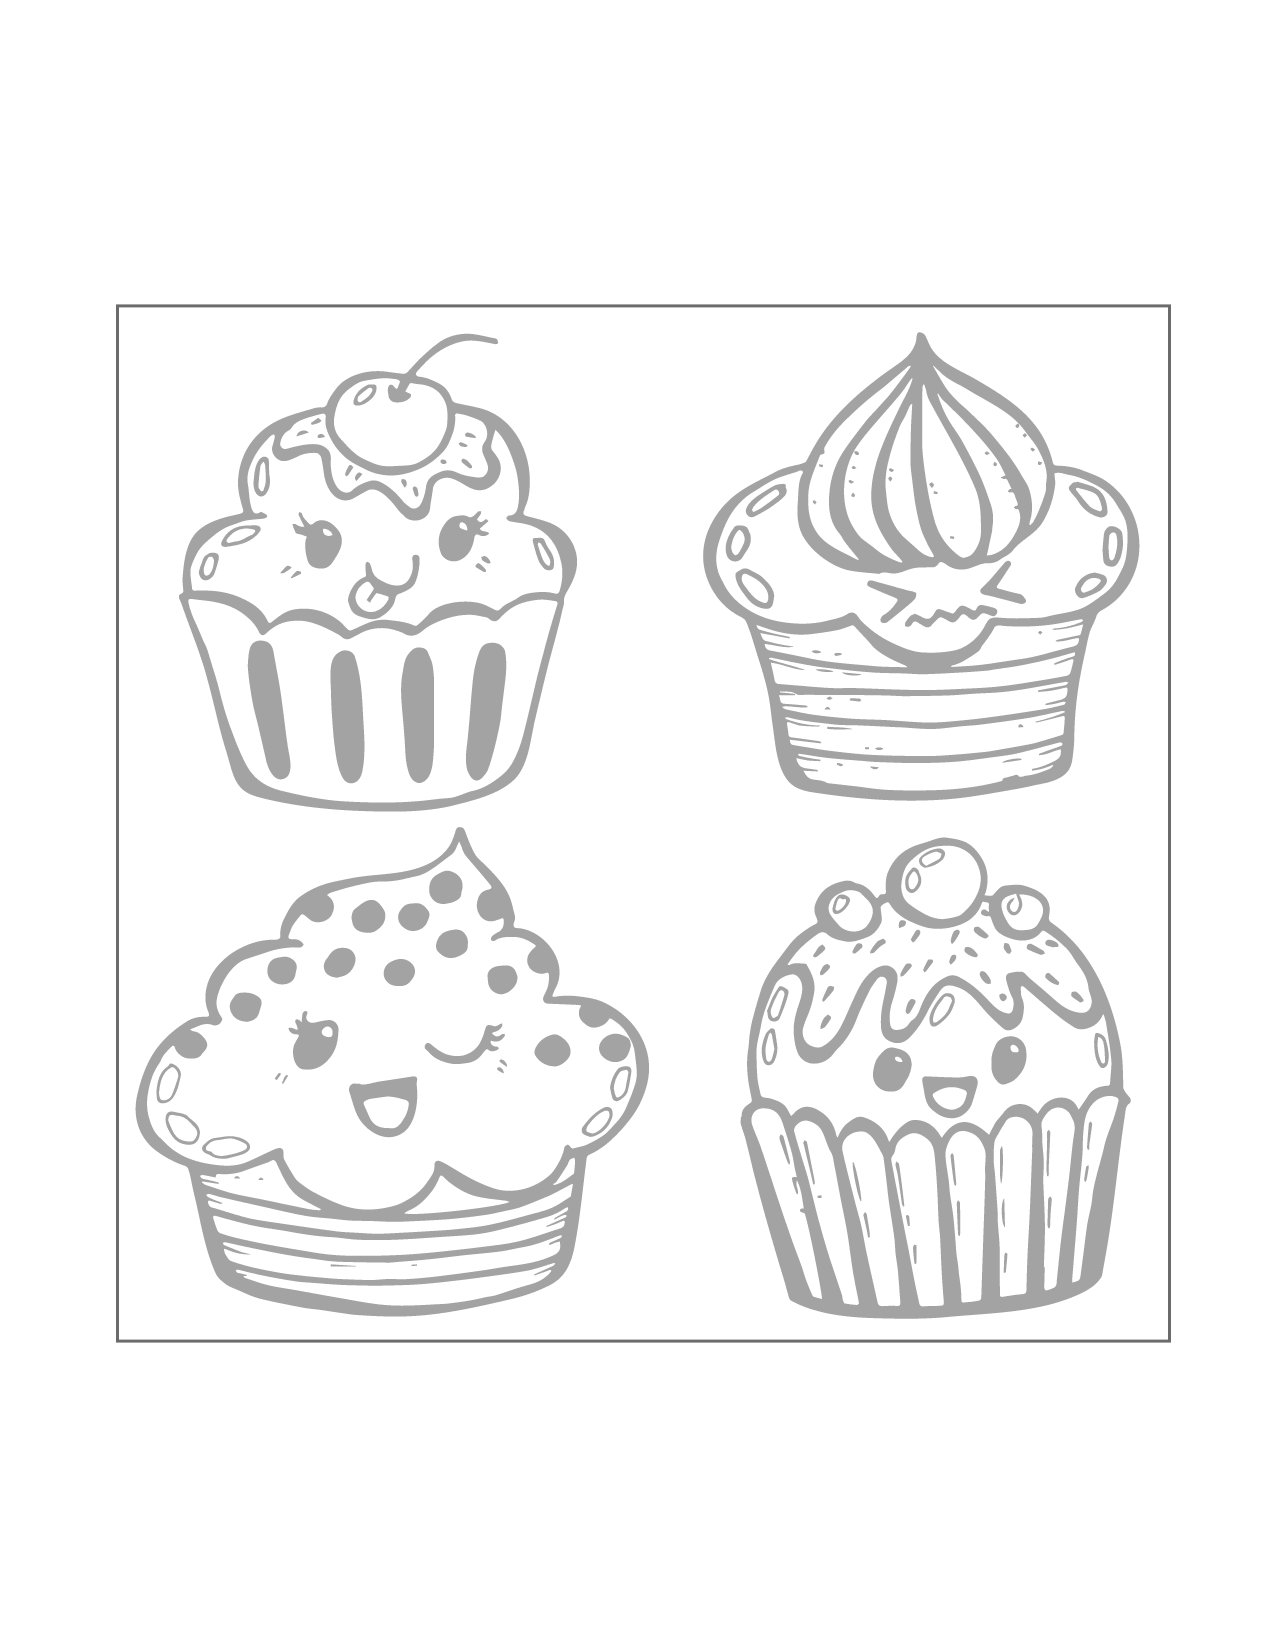 Cupcake Faces Traceable Sheet